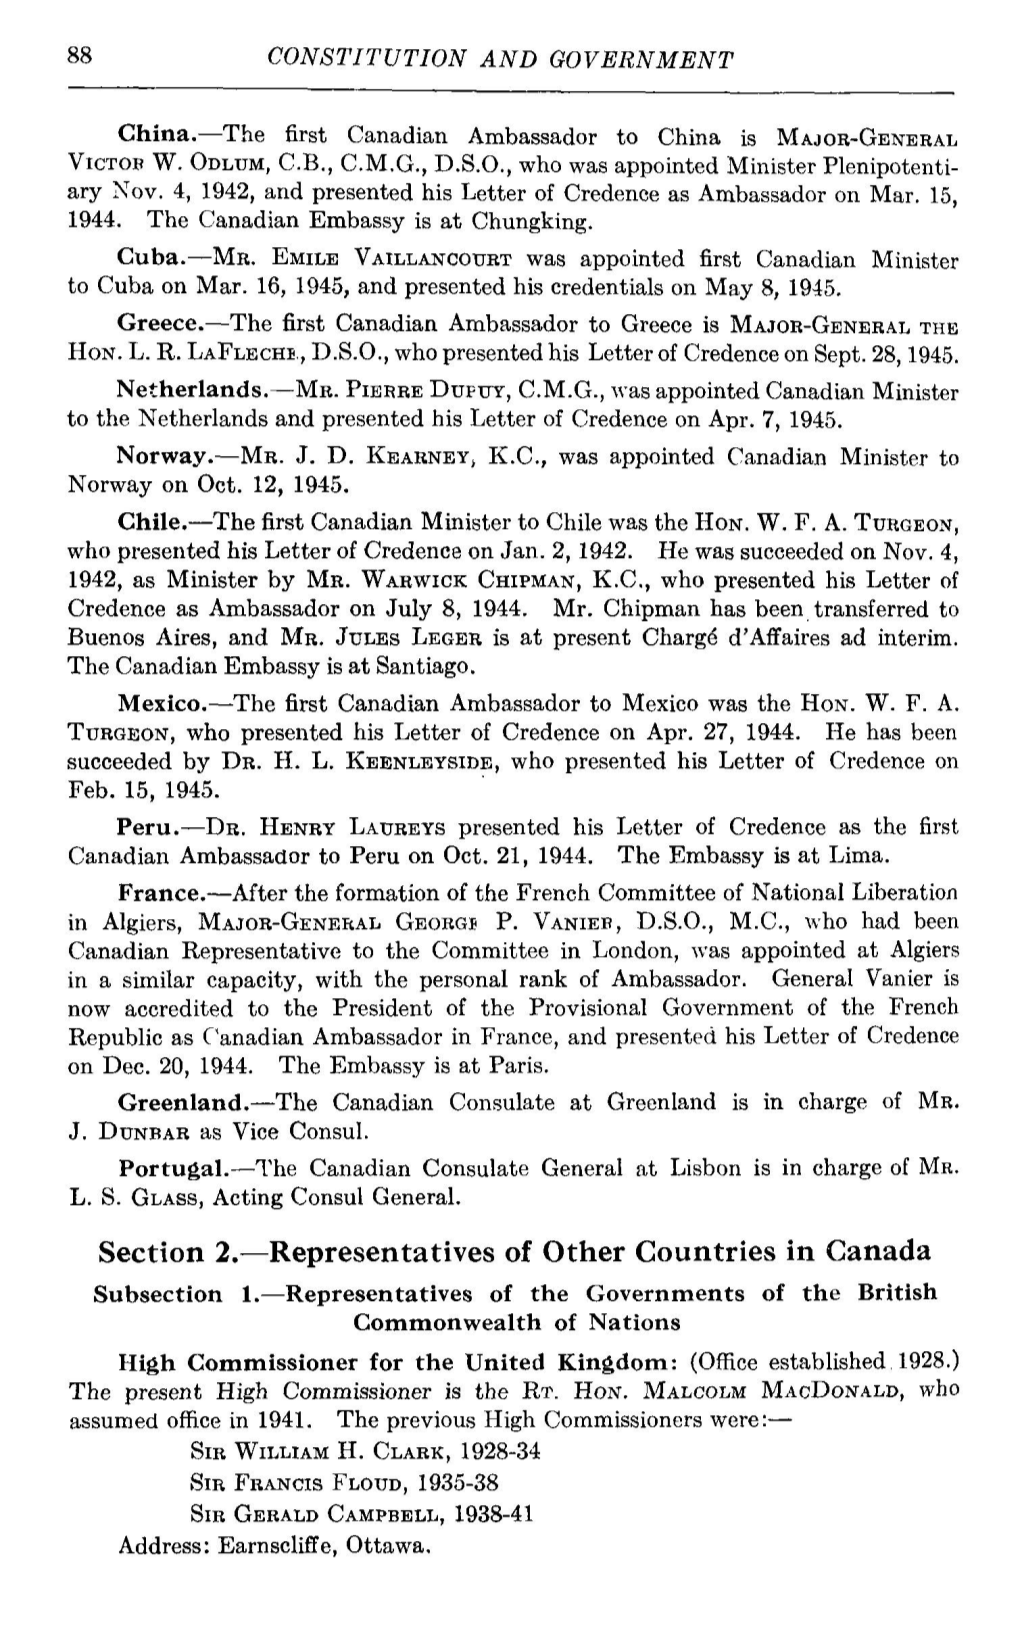 Section 2.—Representatives of Other Countries in Canada